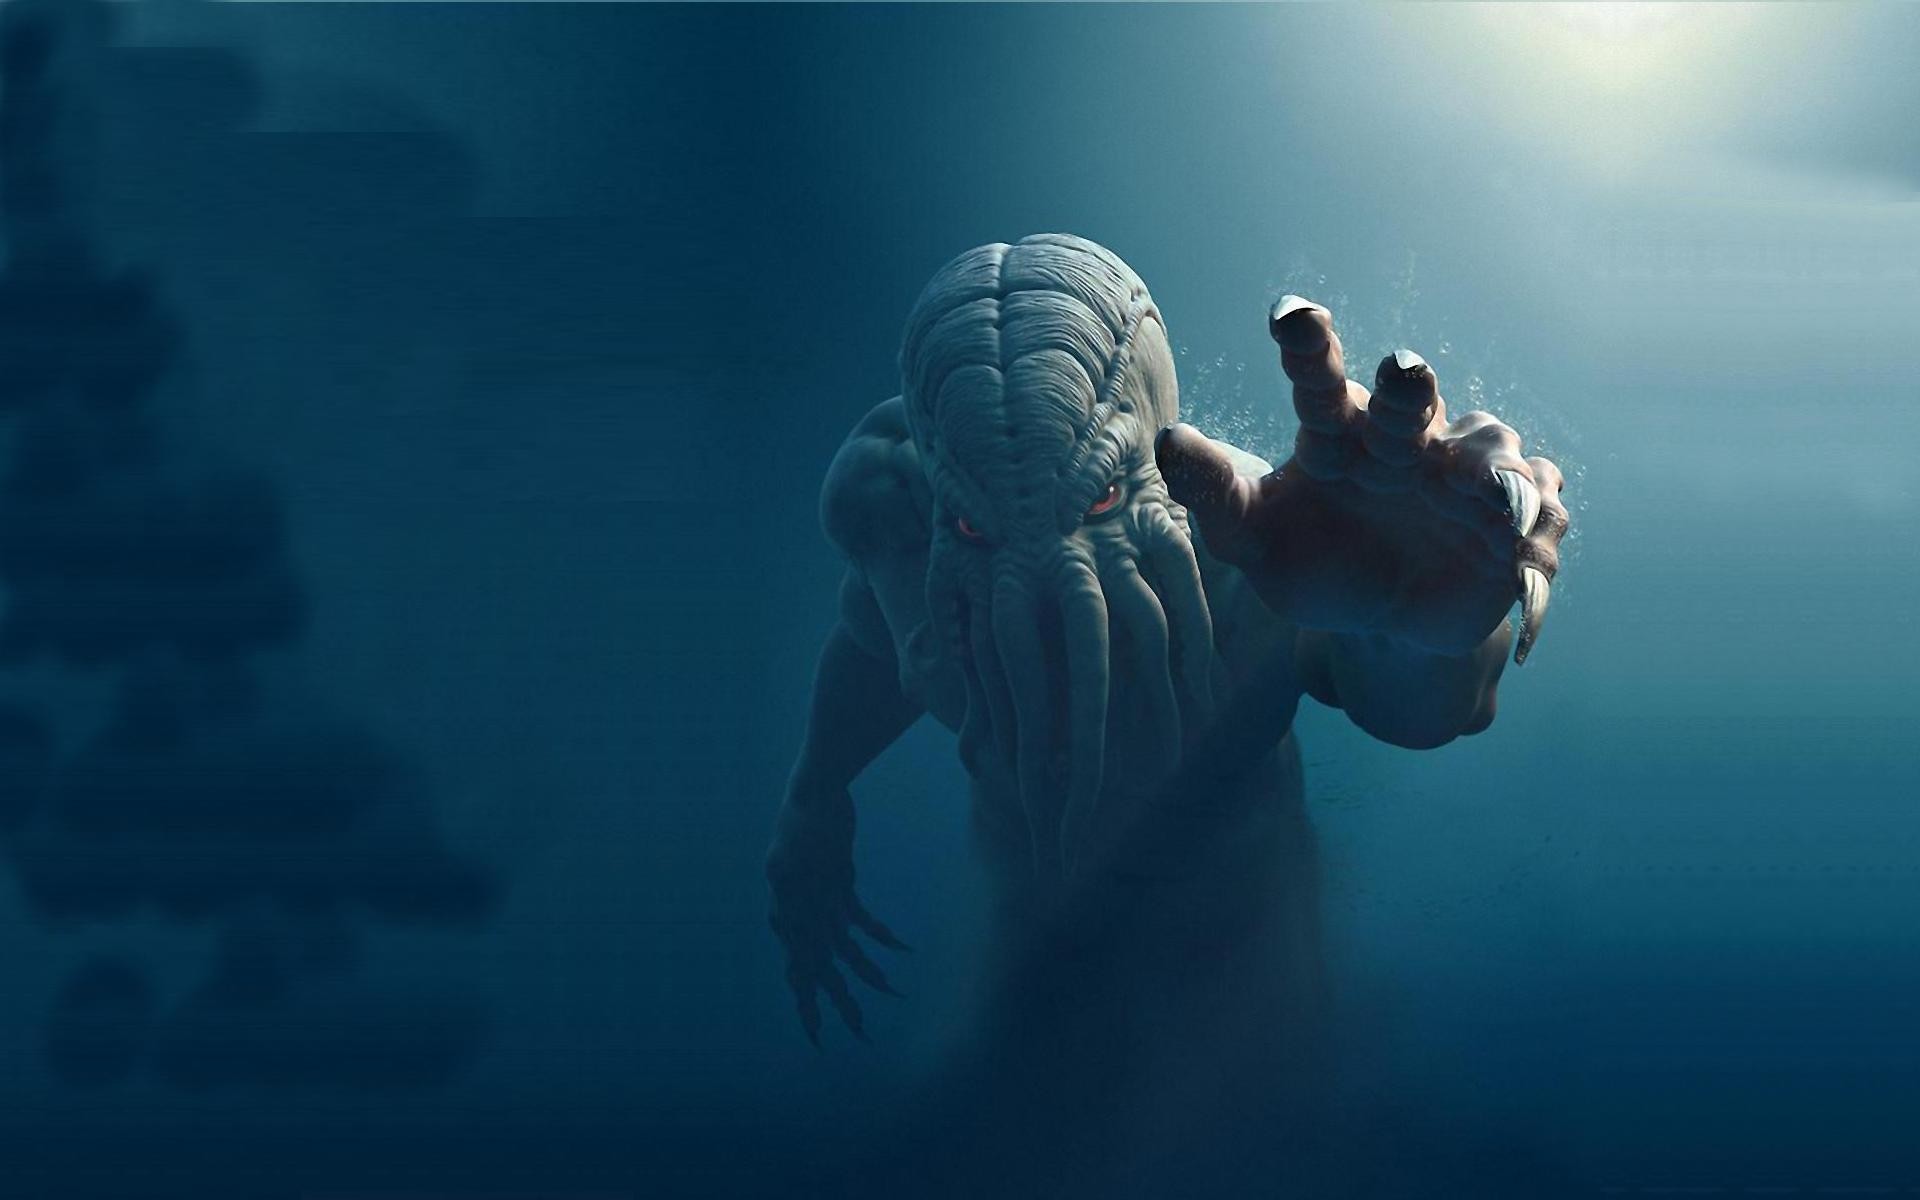 Cthulhu monster at the bottom of the sea wallpapers and images ...